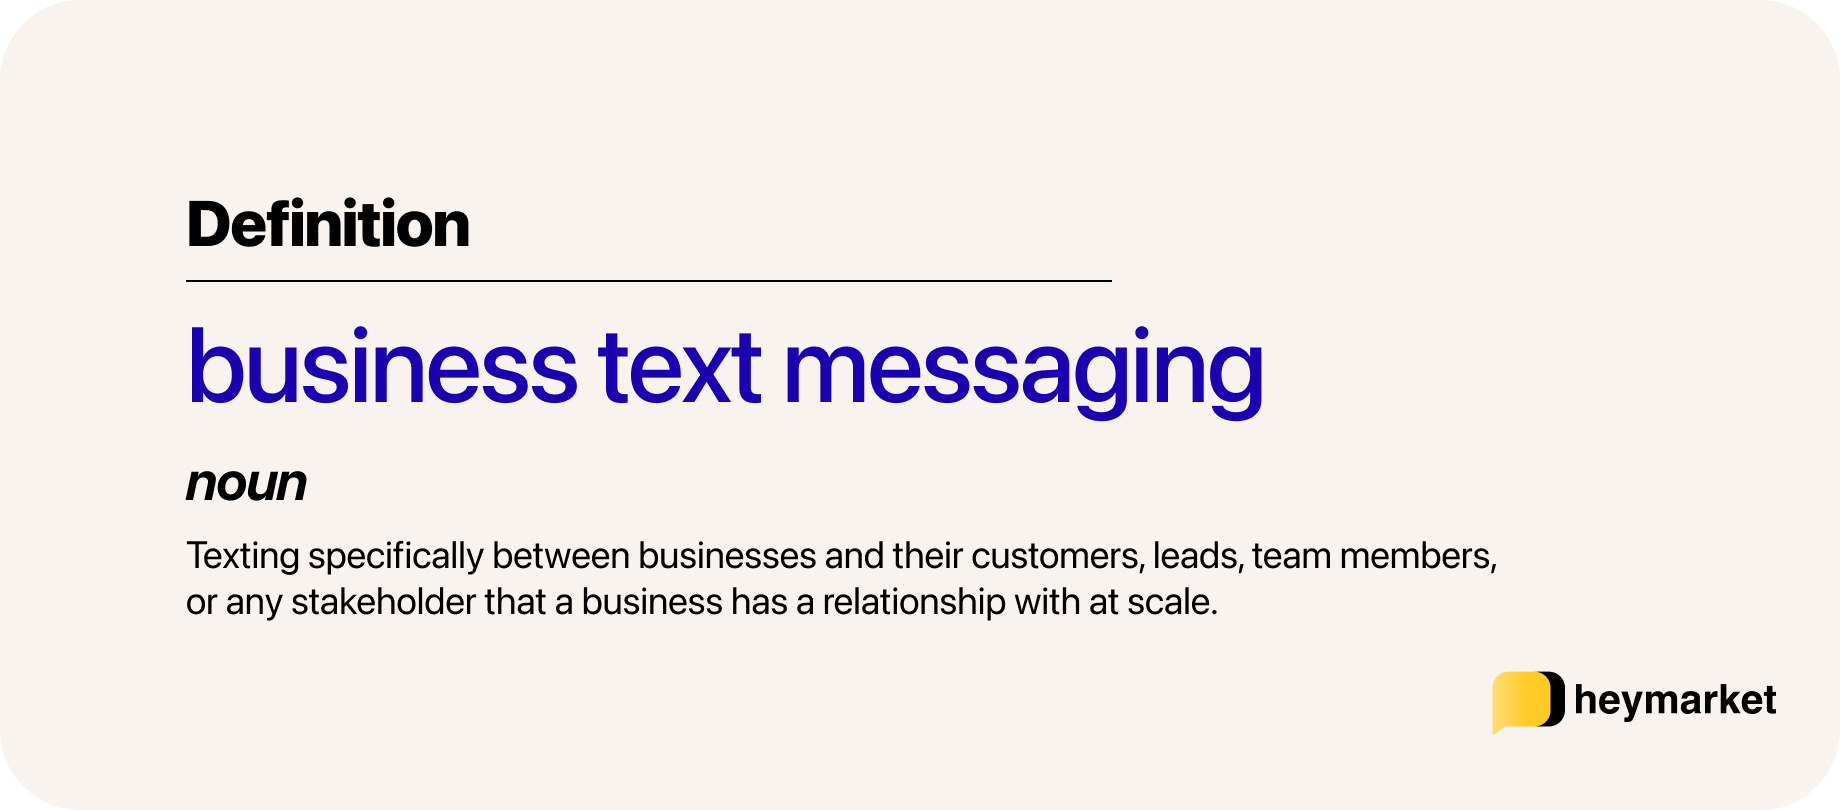 Definition of business text messaging: Texting specifically between businesses and their customers, leads, team members, or any stakeholder that a business has a relationship with at scale.